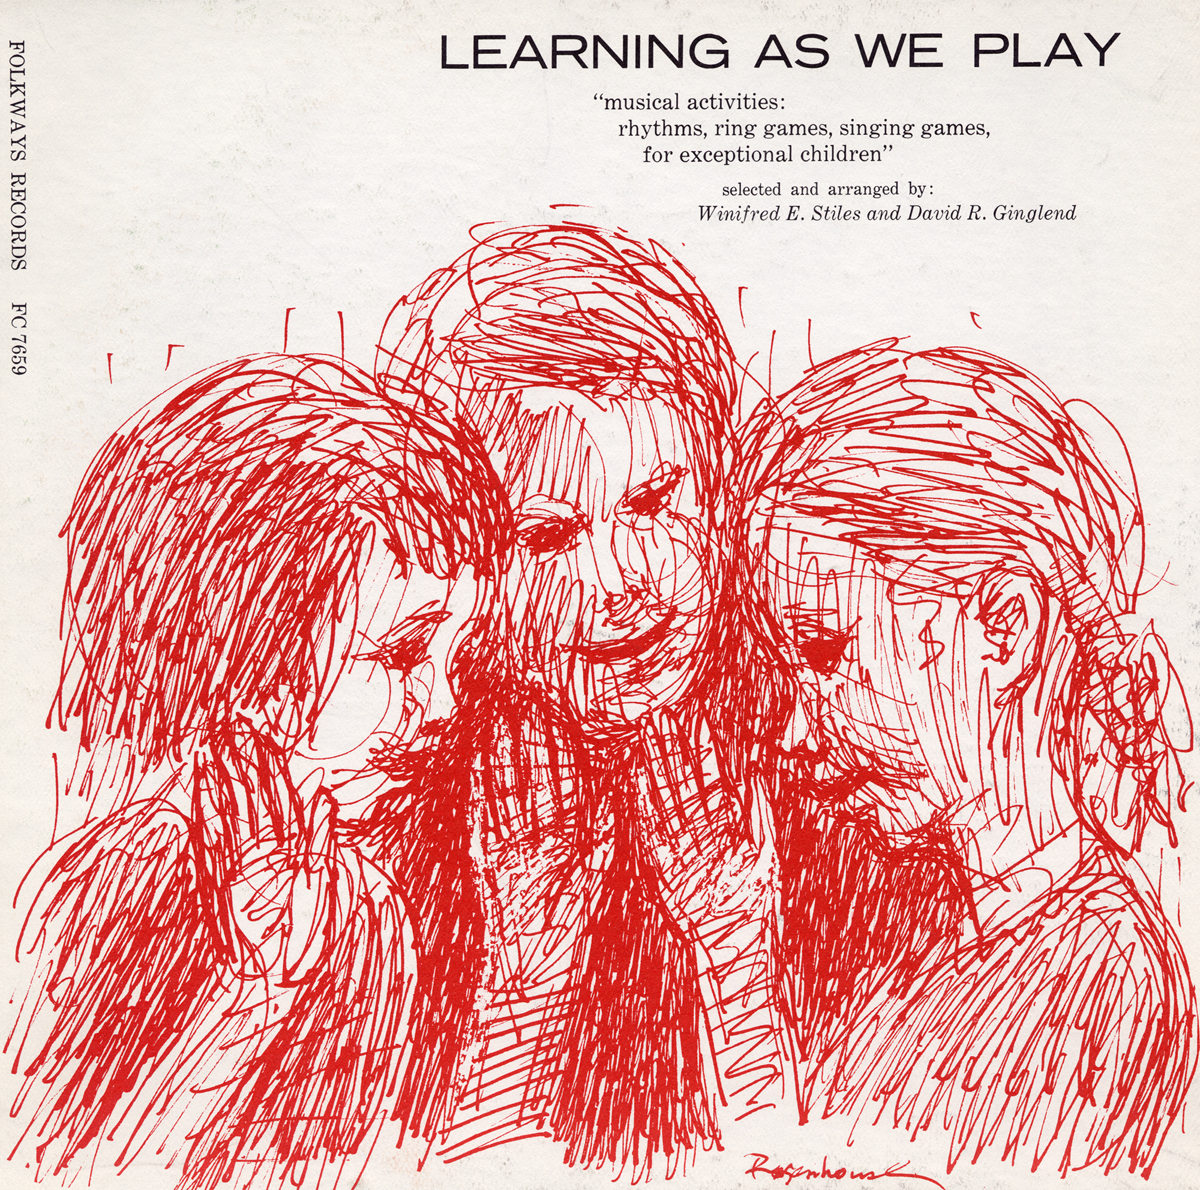 LEARNING AS WE PLAY / VARIOUS